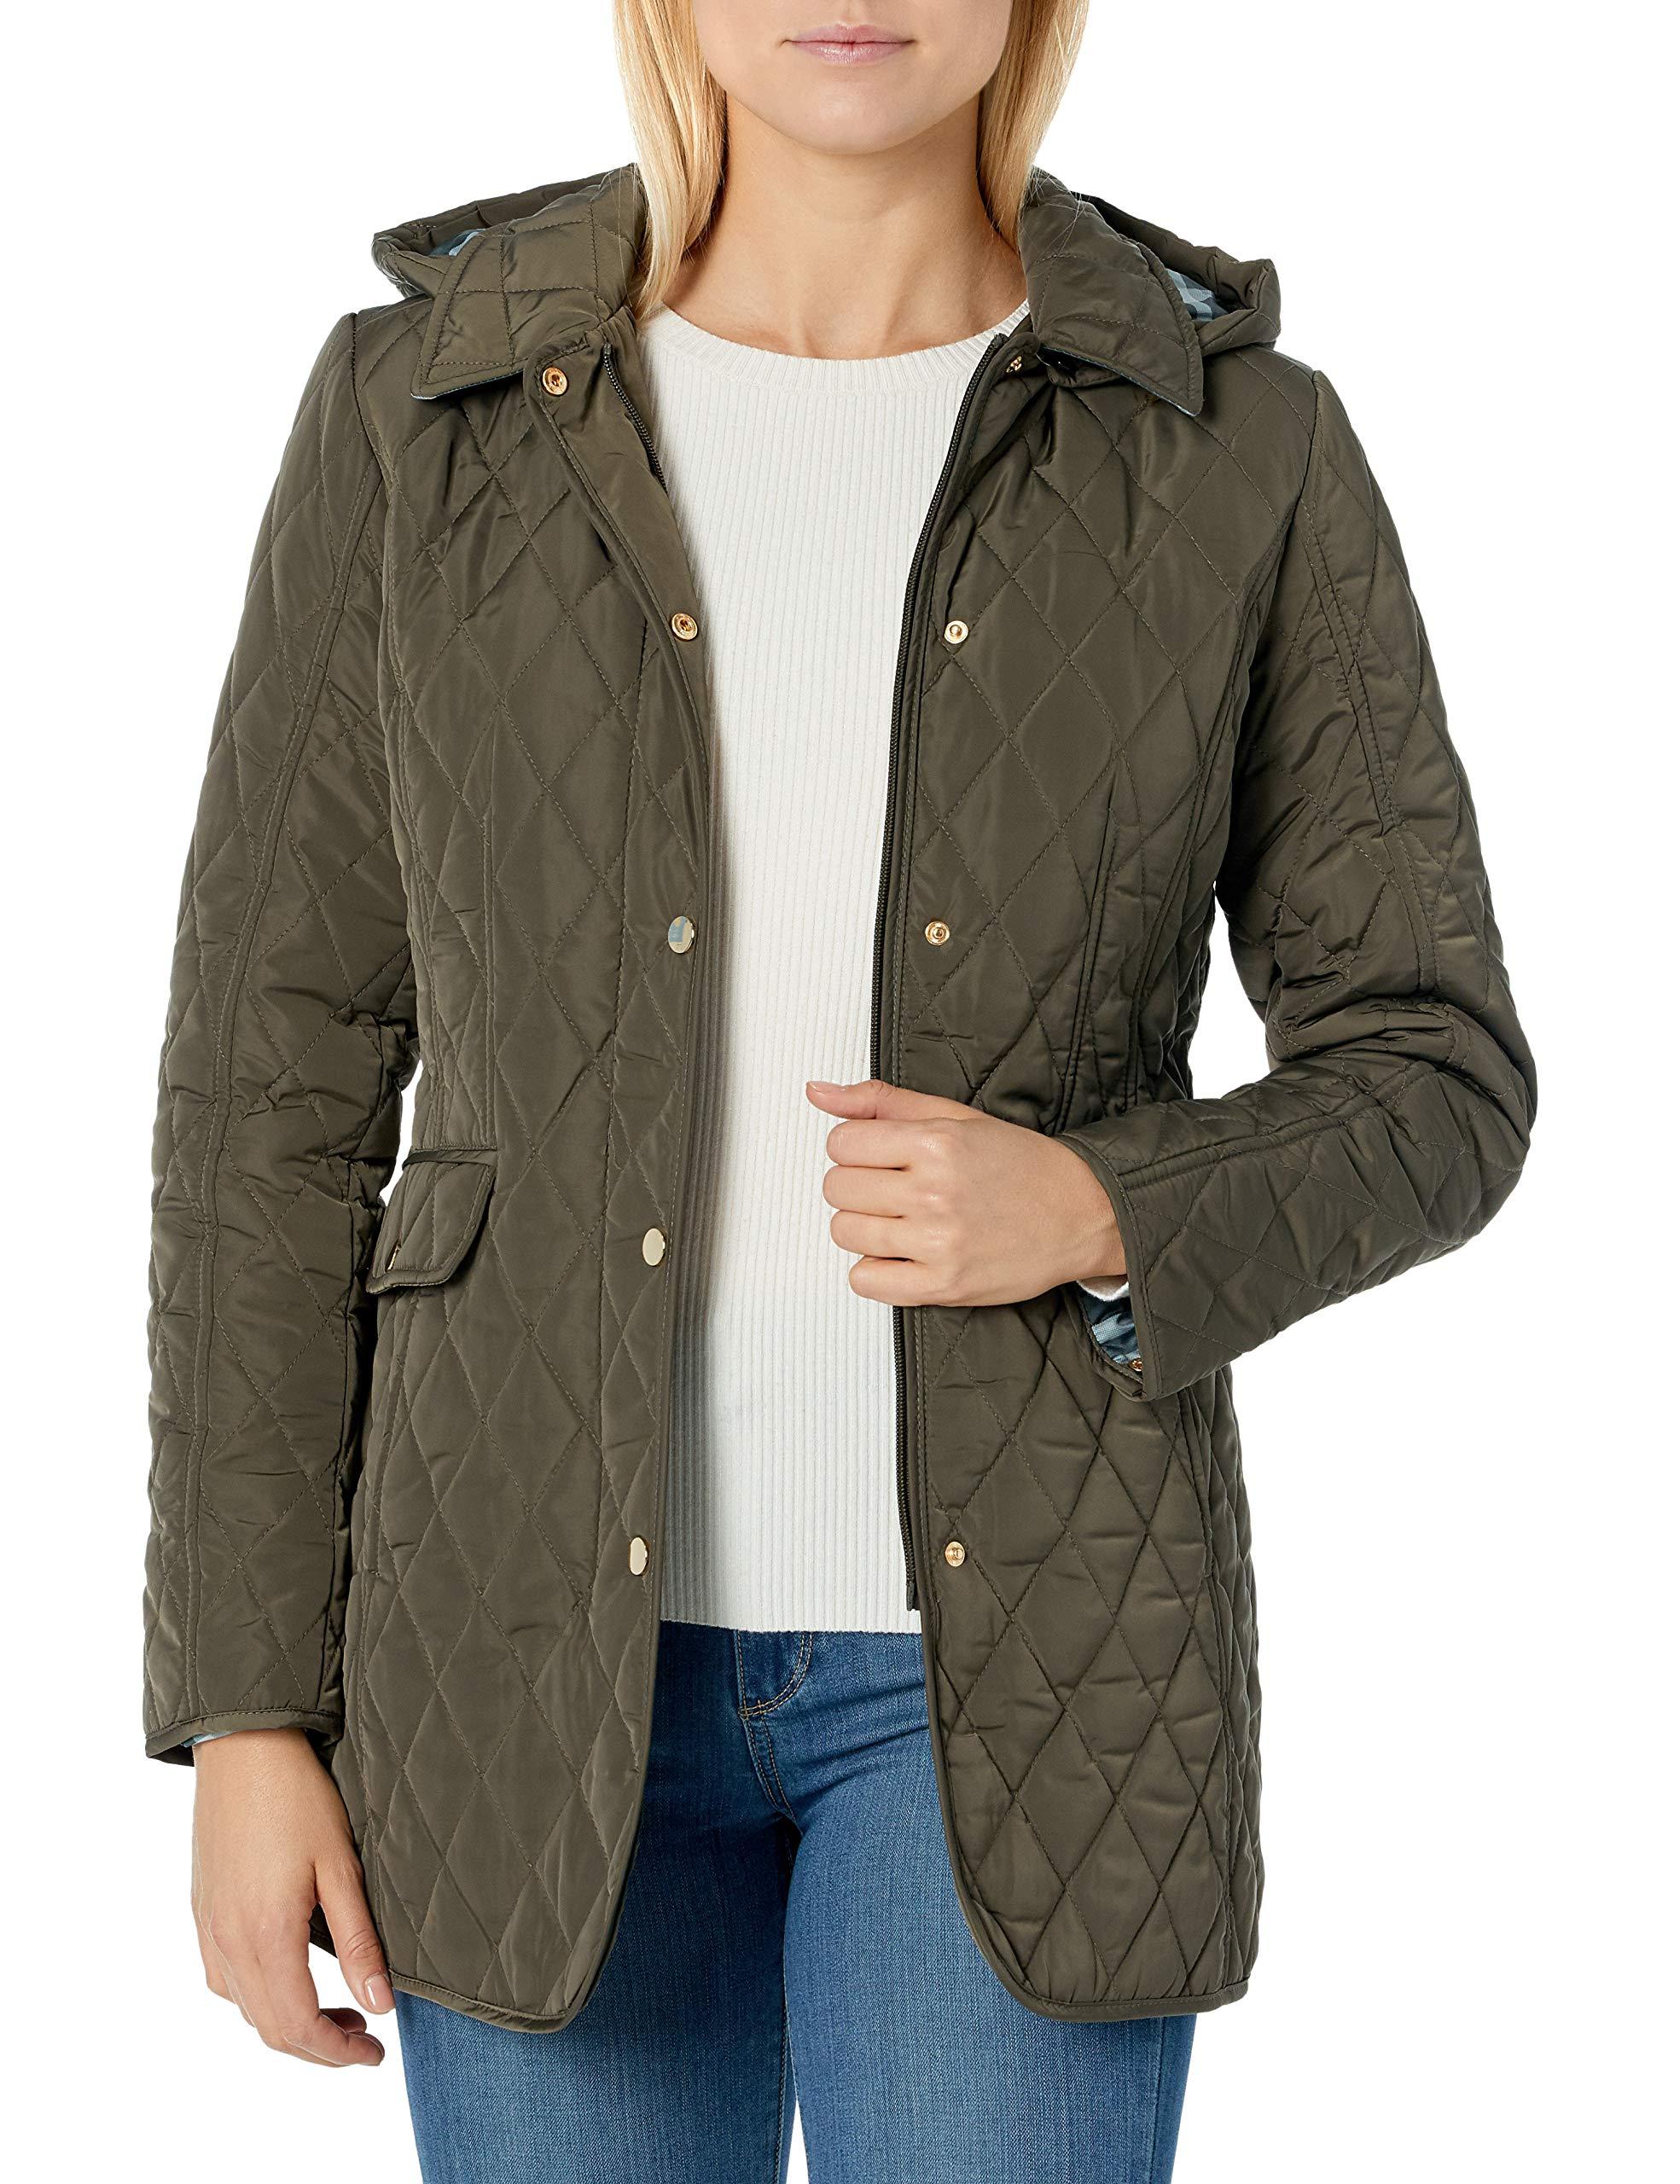 Jones New York Quilted Jacket With Hood in Green - Lyst